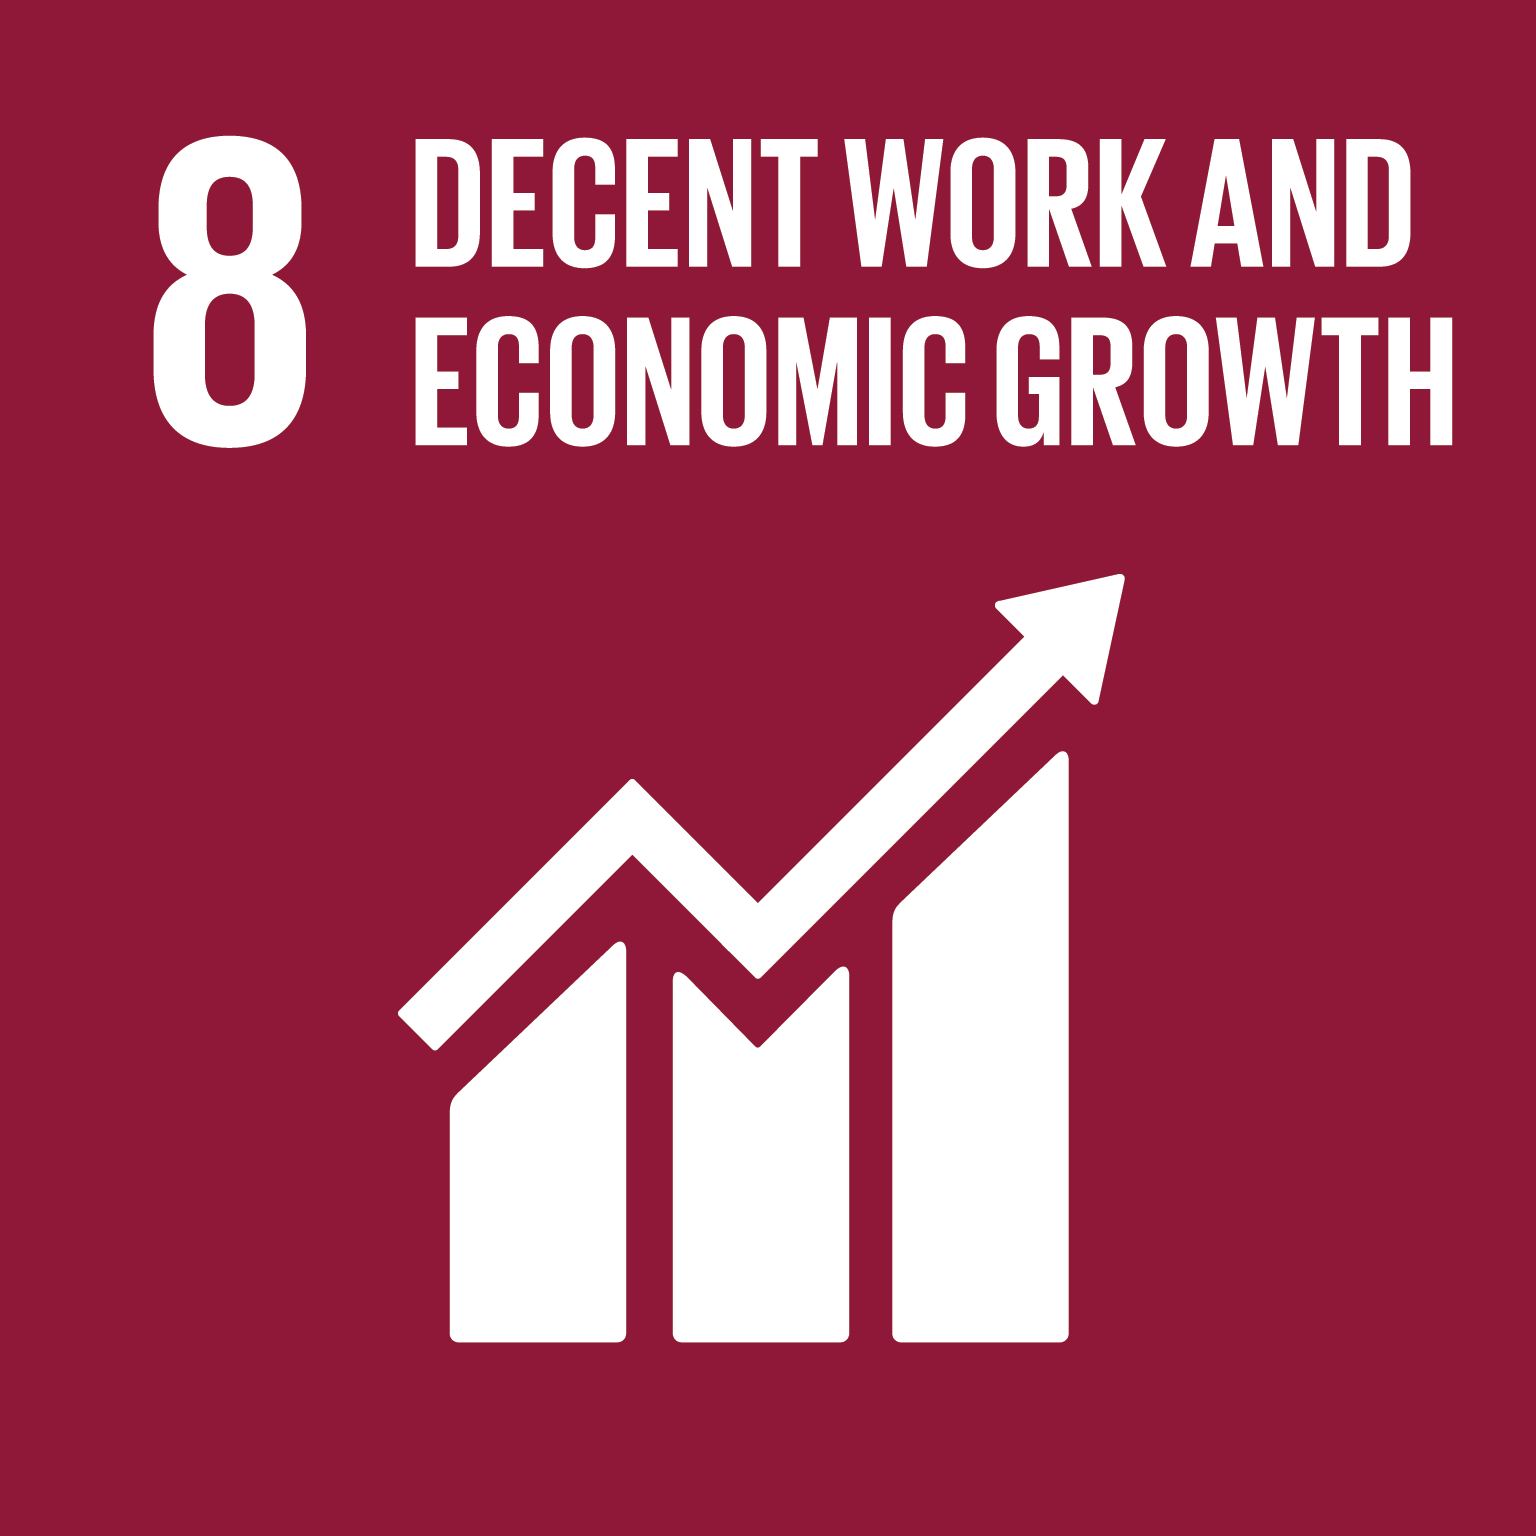 The 8th SDG: Decent work and economic growth